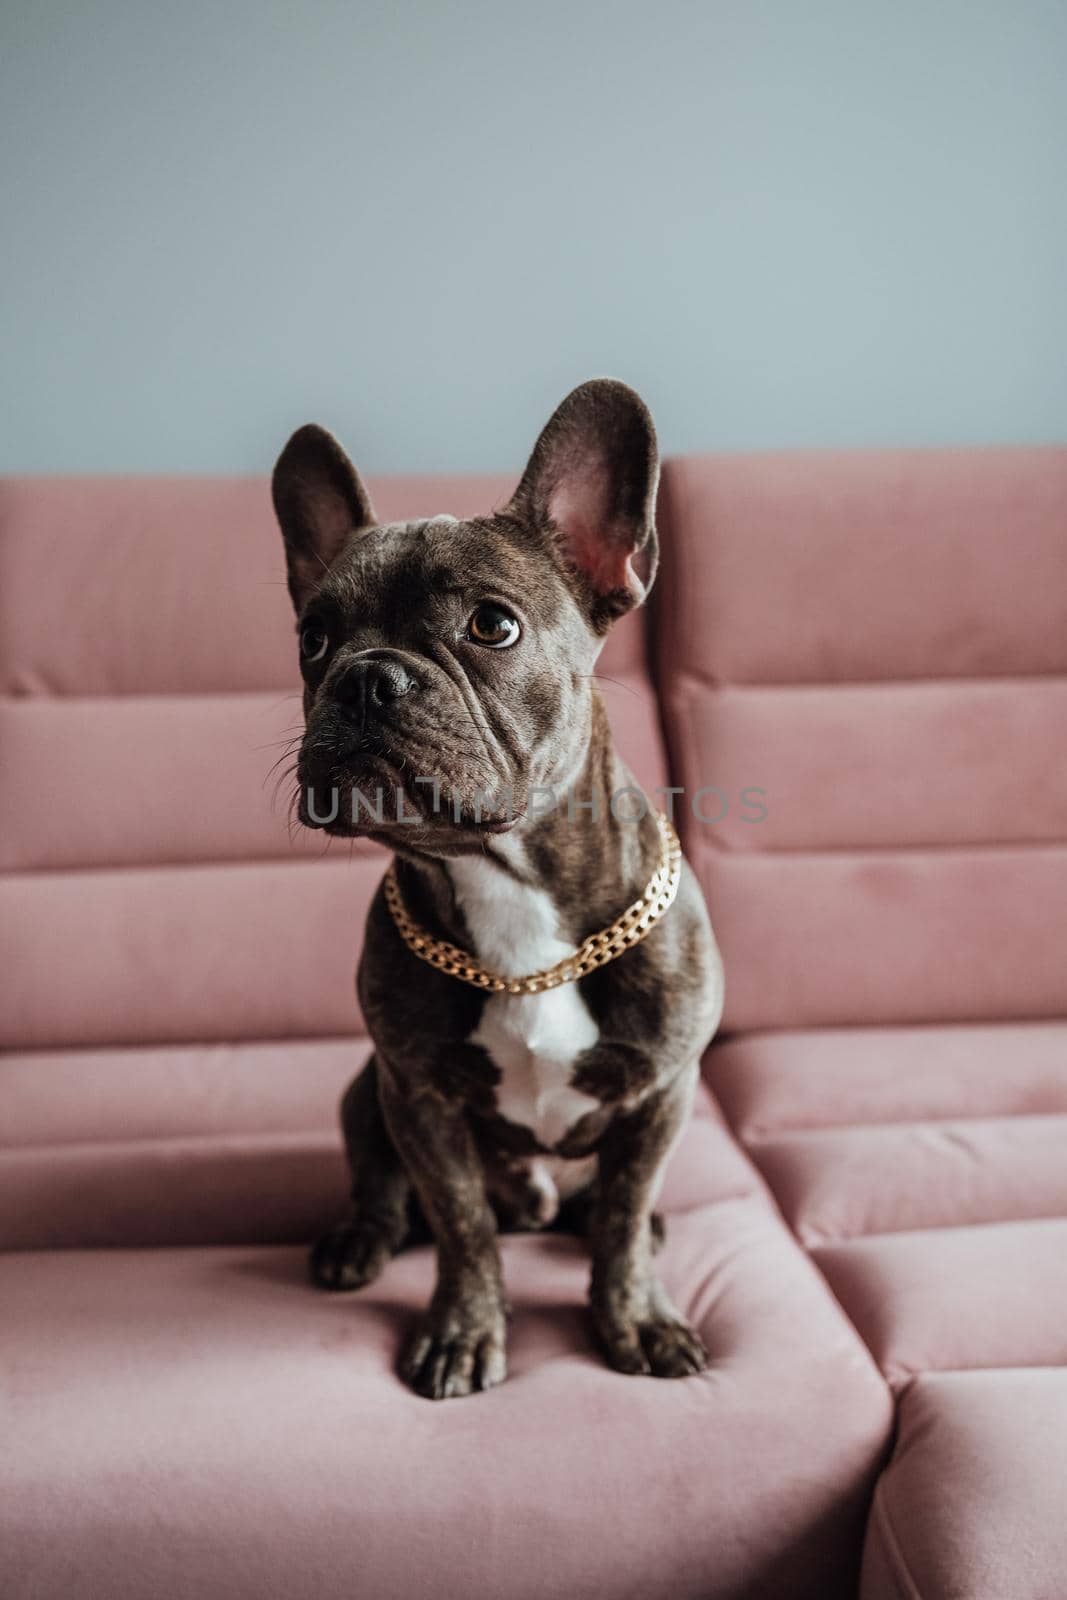 Small French Bulldog with Golden Chain Sitting on the Pink Sofa Looking Up Pitifully by Romvy